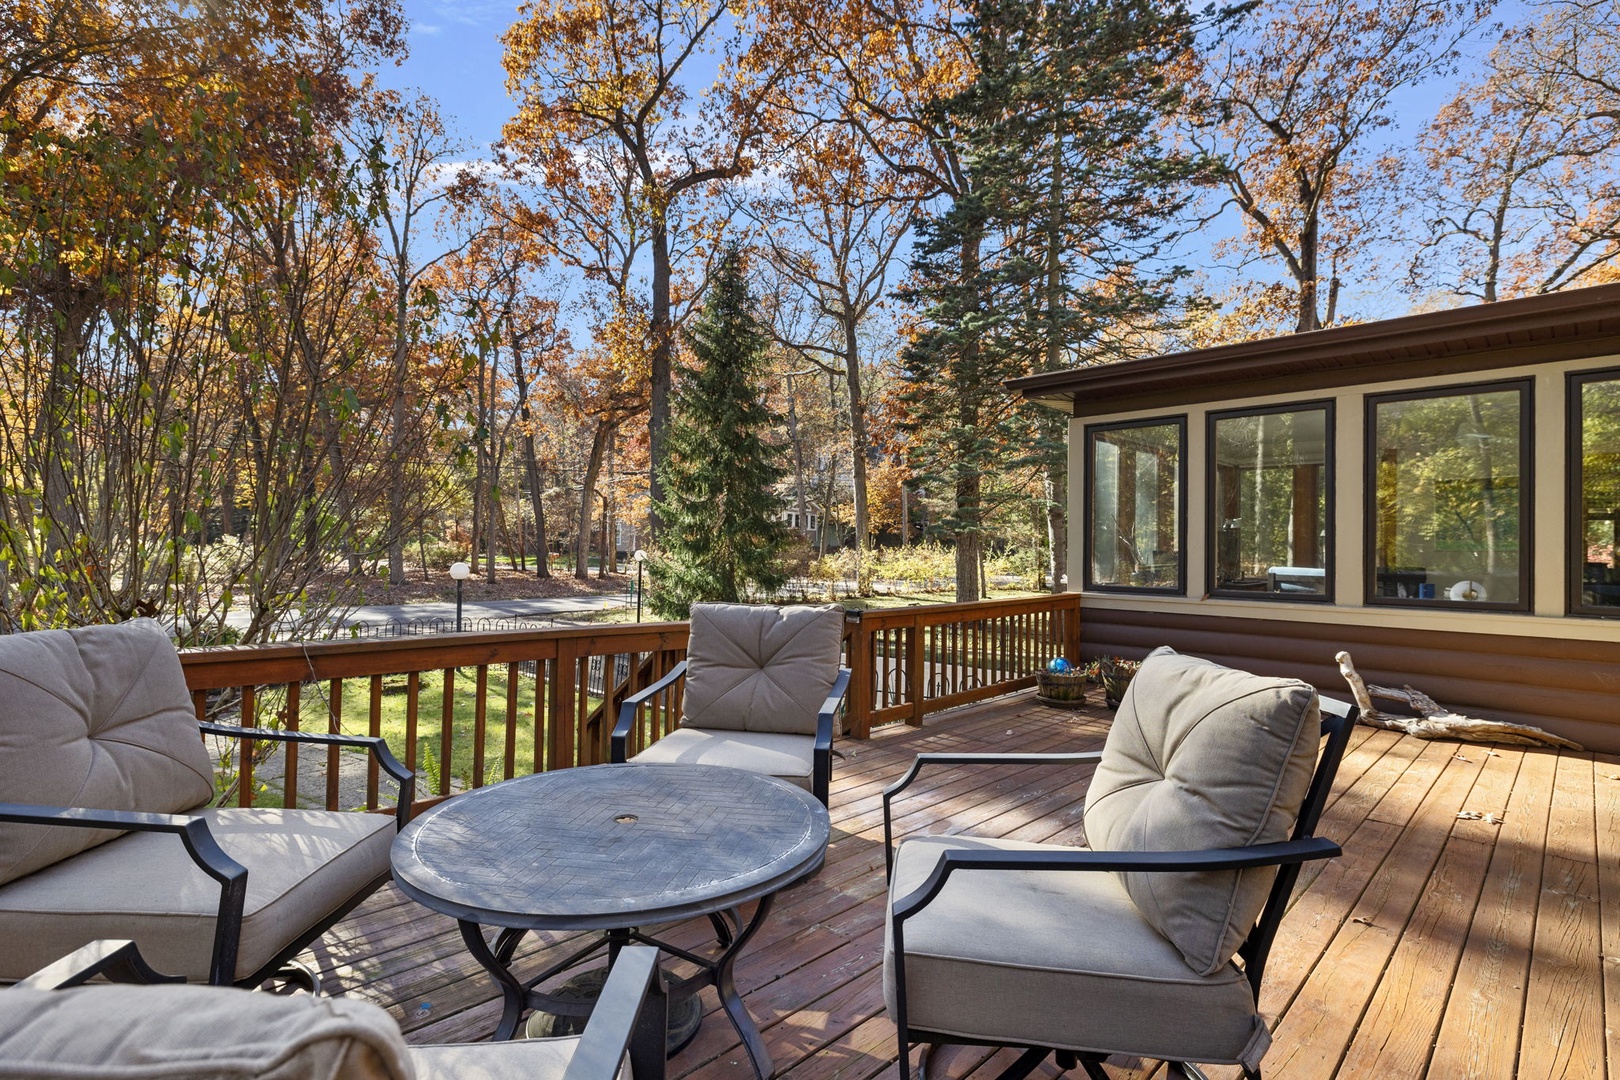 Wade’s Cabin features fantastic back deck for chilling with your guests.